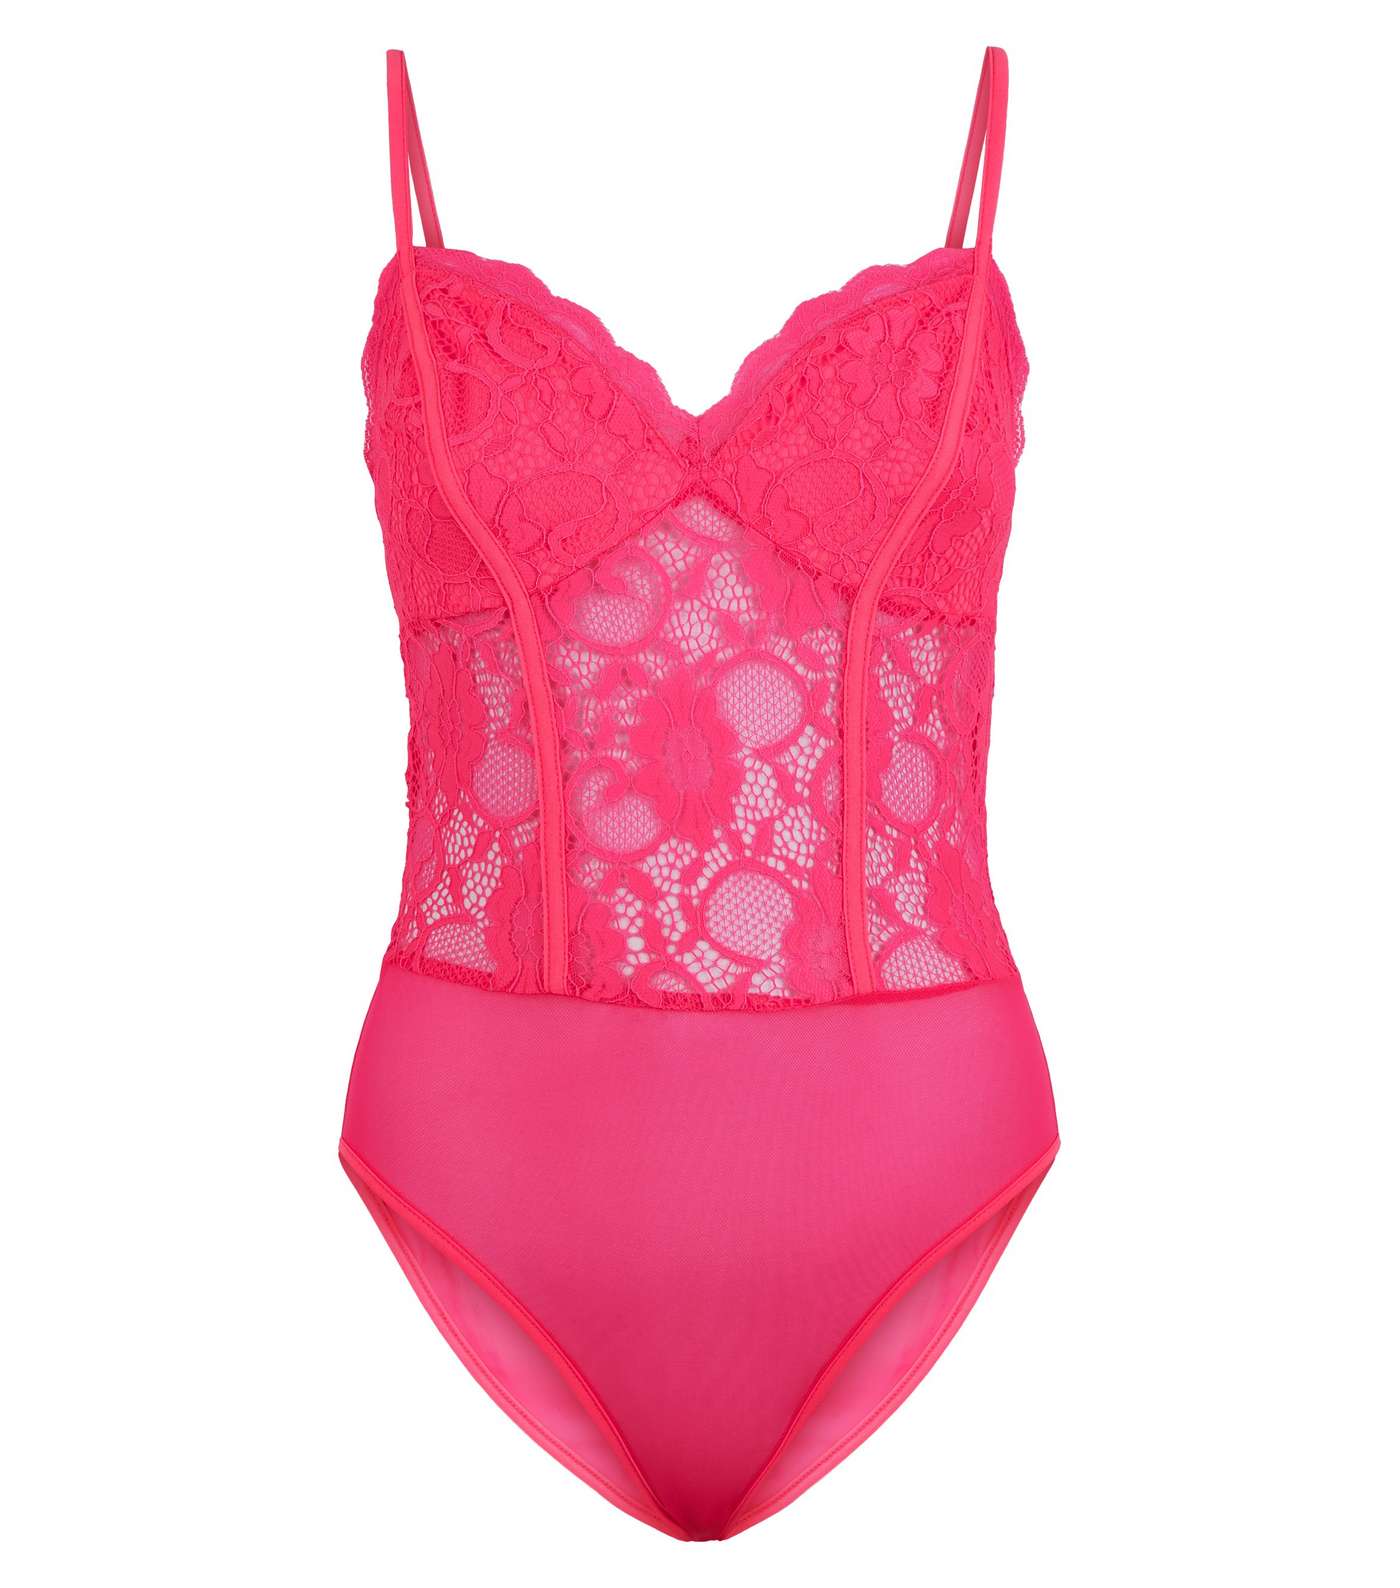 Mid Pink Neon Sheer Lace Bodysuit Image 4